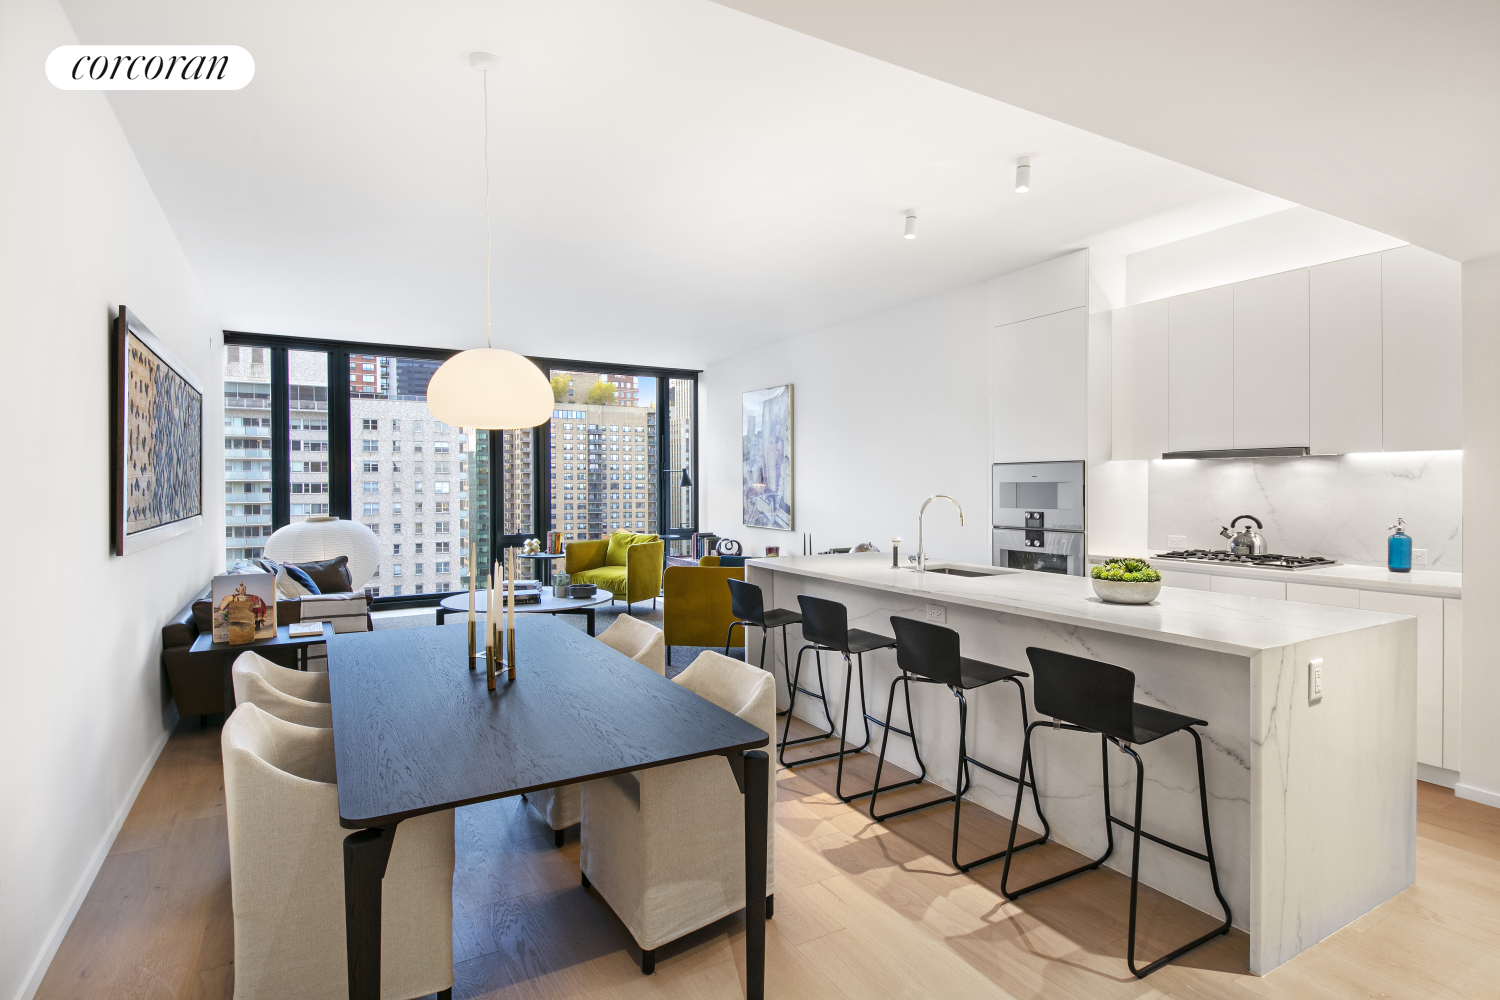 695 1st Avenue 34G, Murray Hill, Midtown East, NYC - 2 Bedrooms  
2.5 Bathrooms  
4 Rooms - 